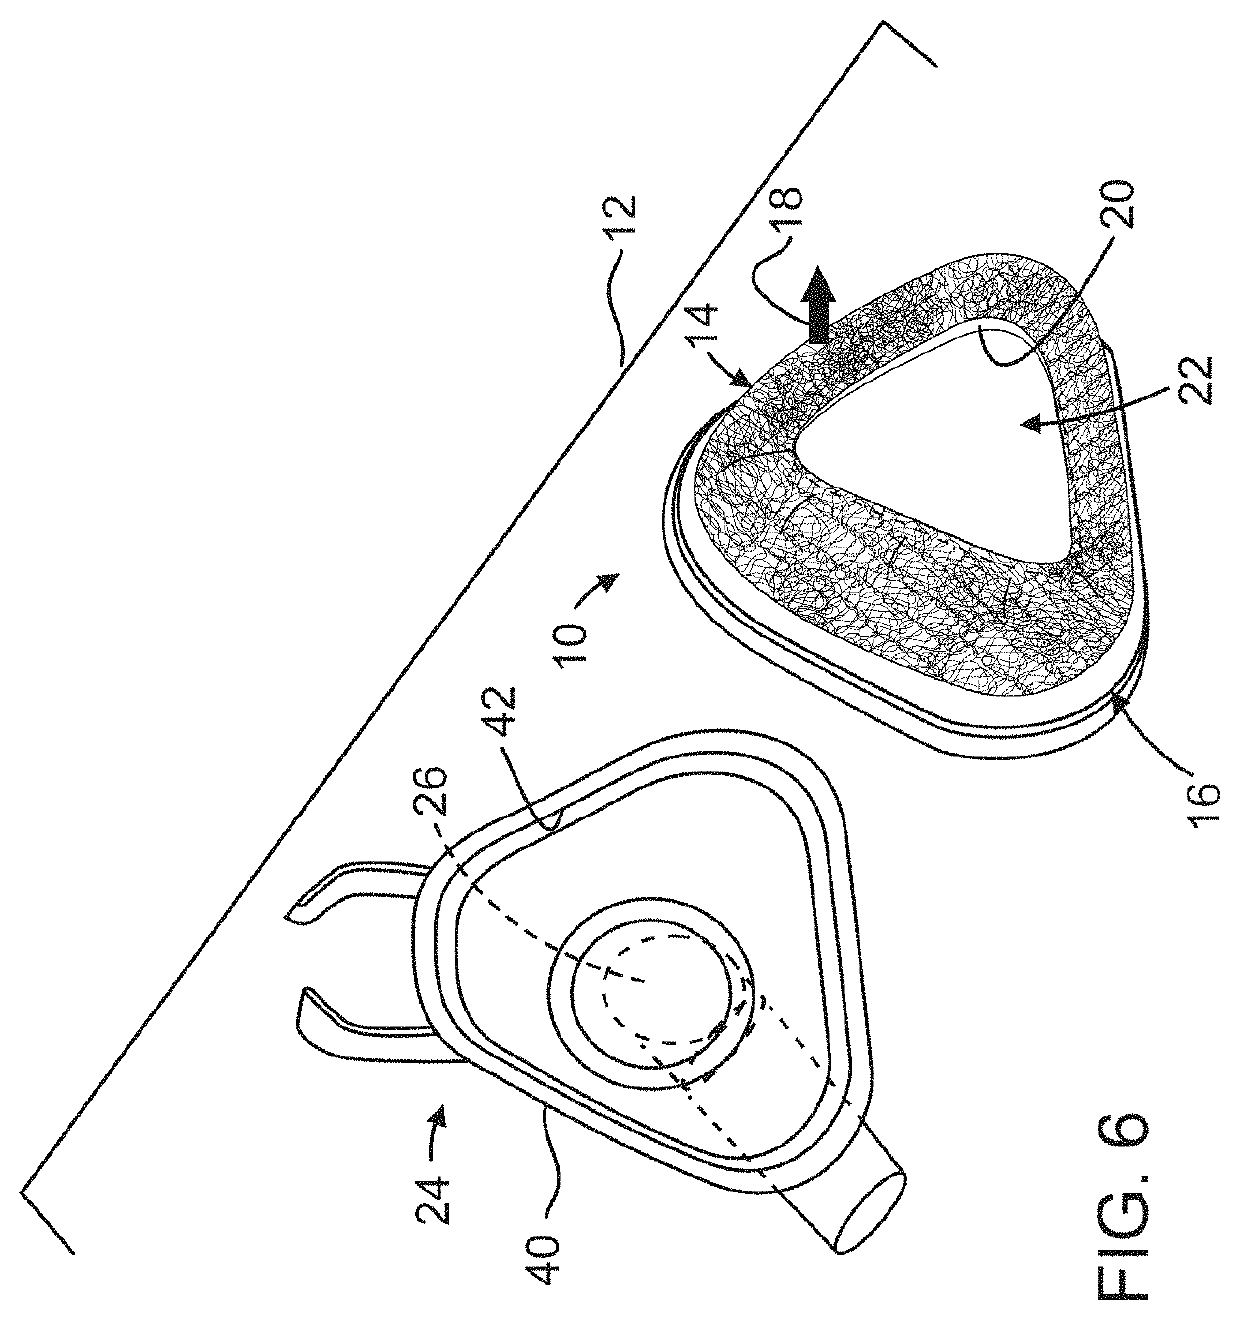 Cushion for patient interface device, breathing mask with cushion, and method and apparatus for same